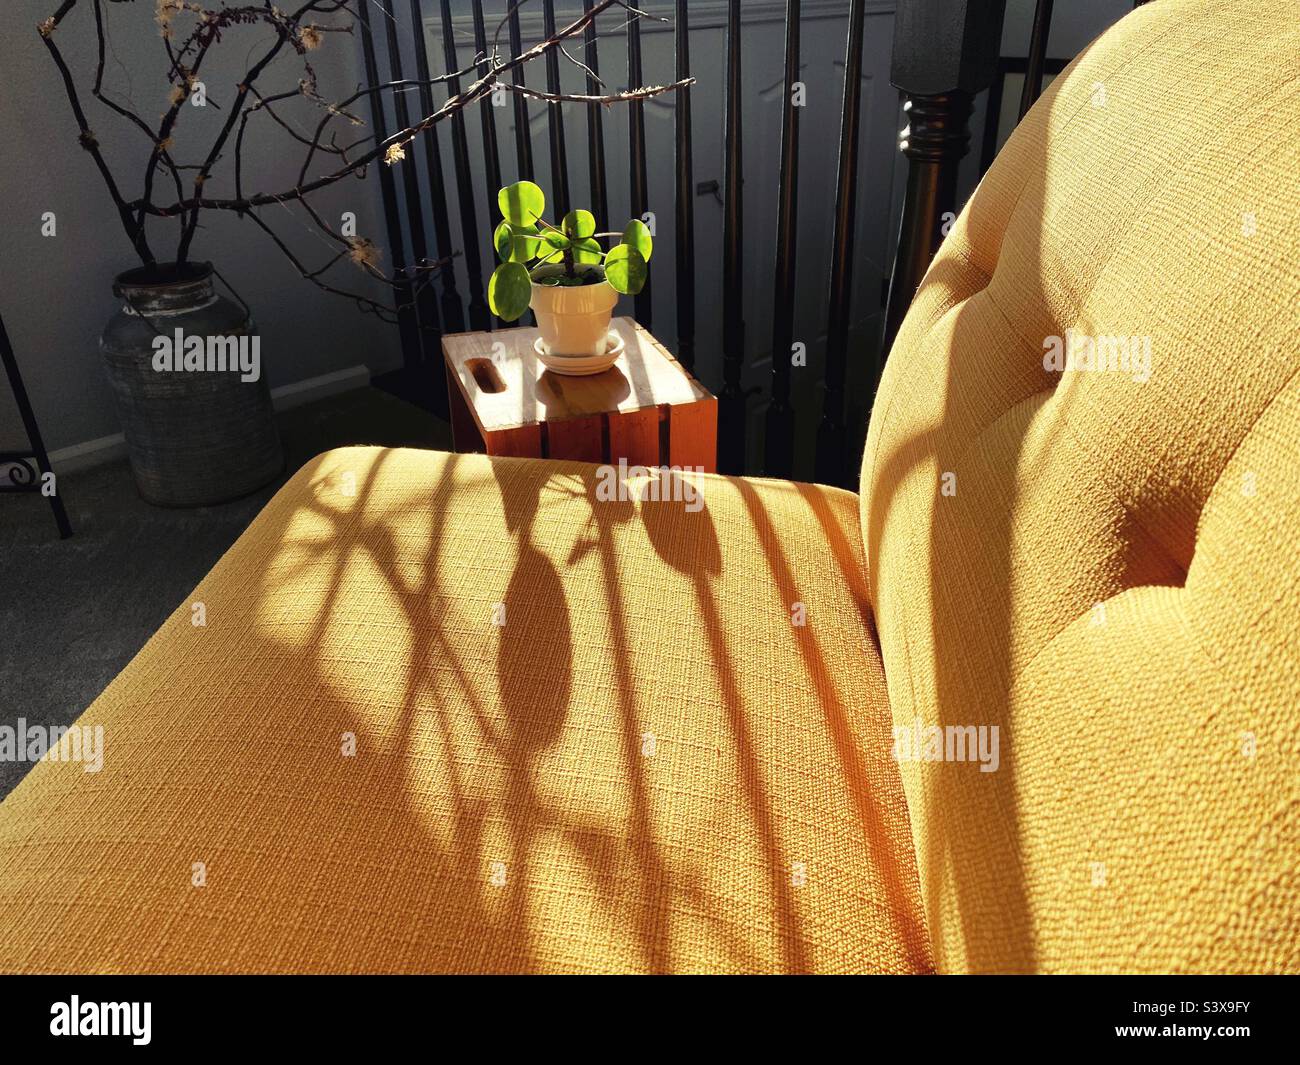 Shadow of a Chinese money plant against a yellow sofa. Stock Photo